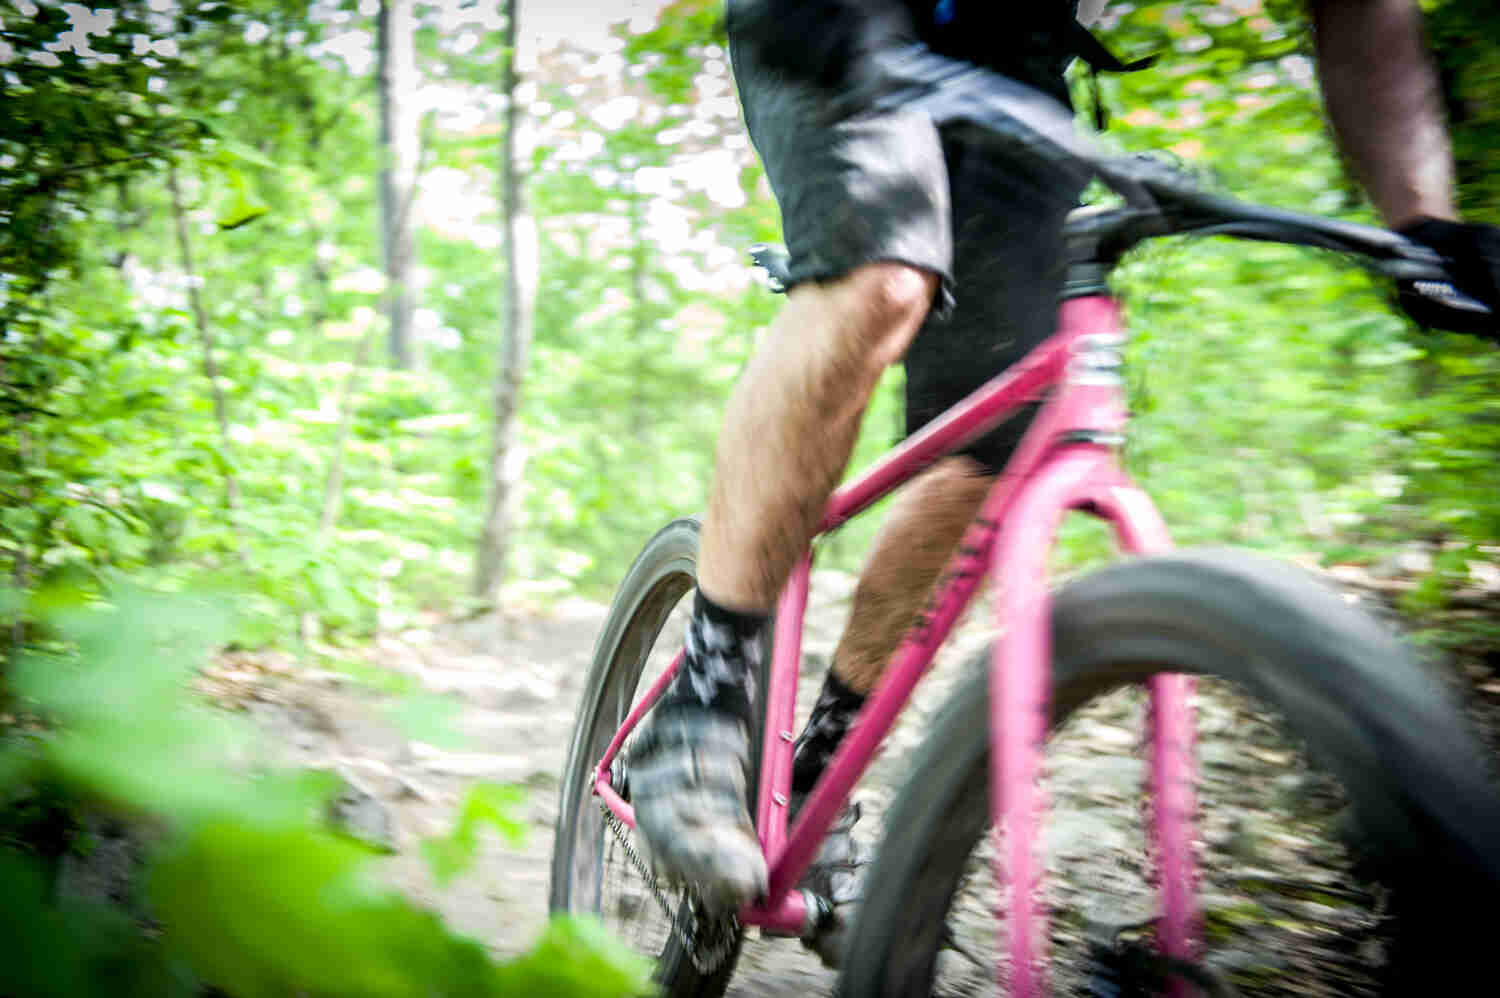 Blurred, front right side view of a cyclist, riding a pink Surly bike on a dirt trail in the woods